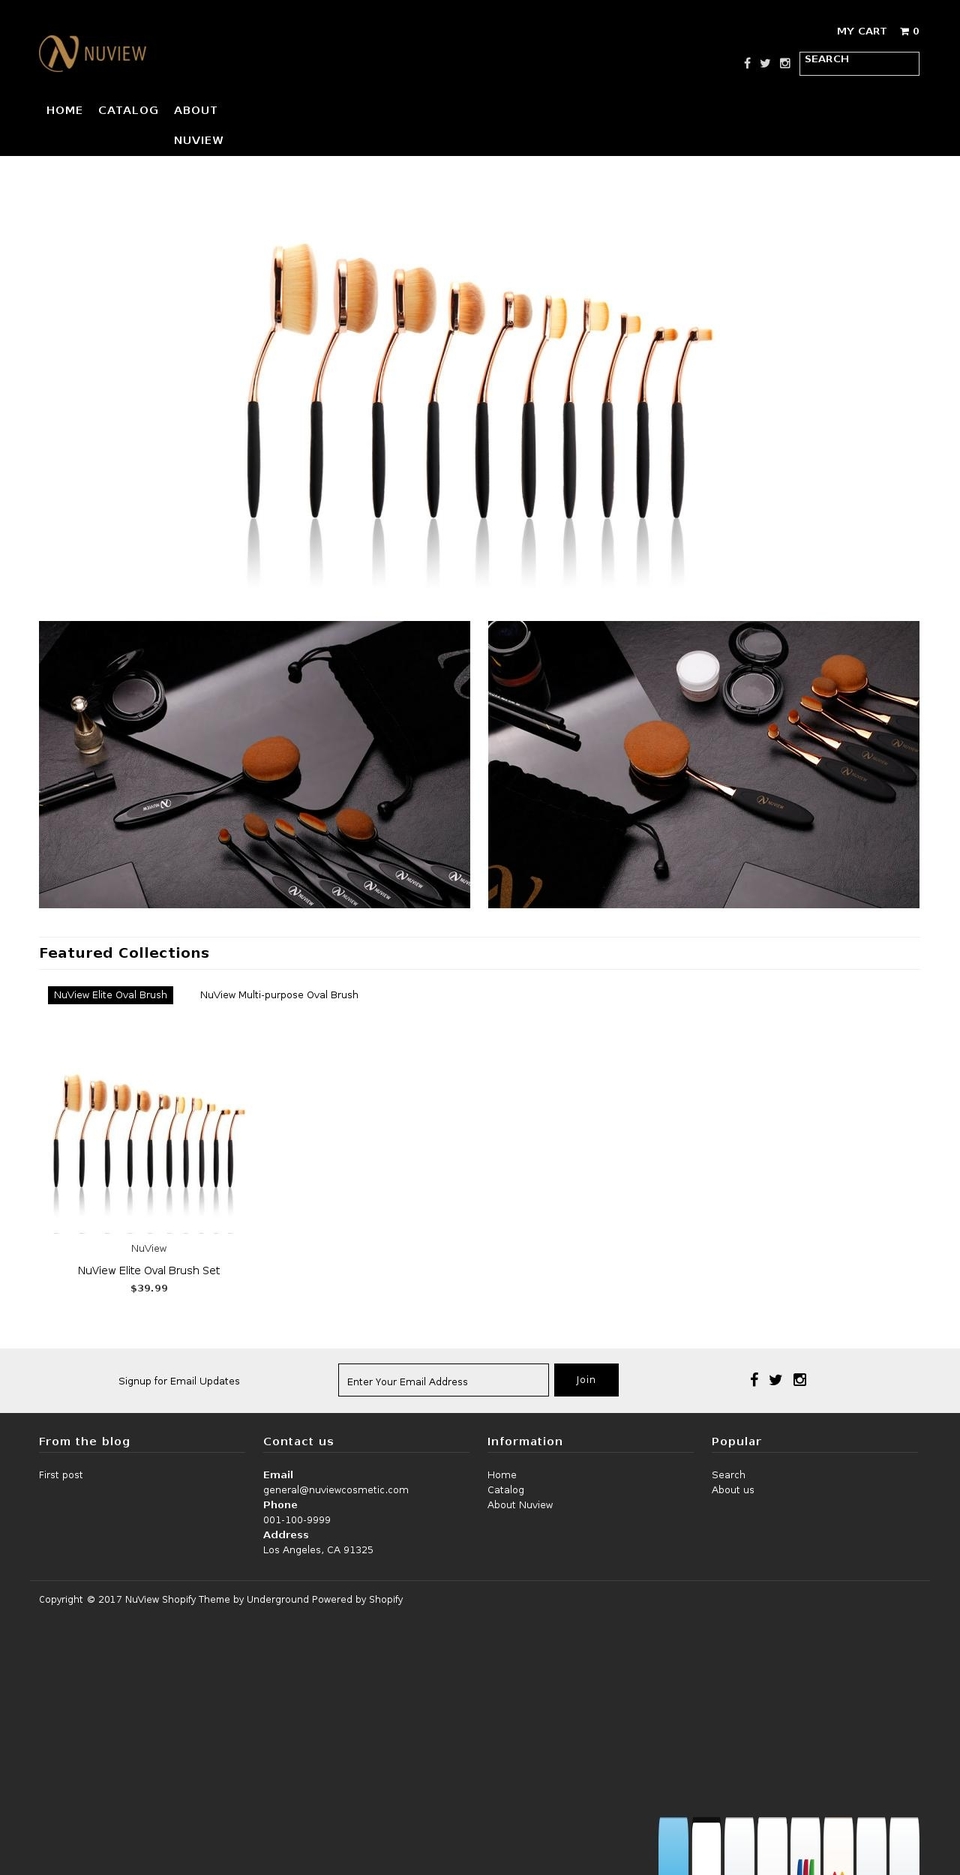 iOne Shopify theme site example nuviewcosmetics.com